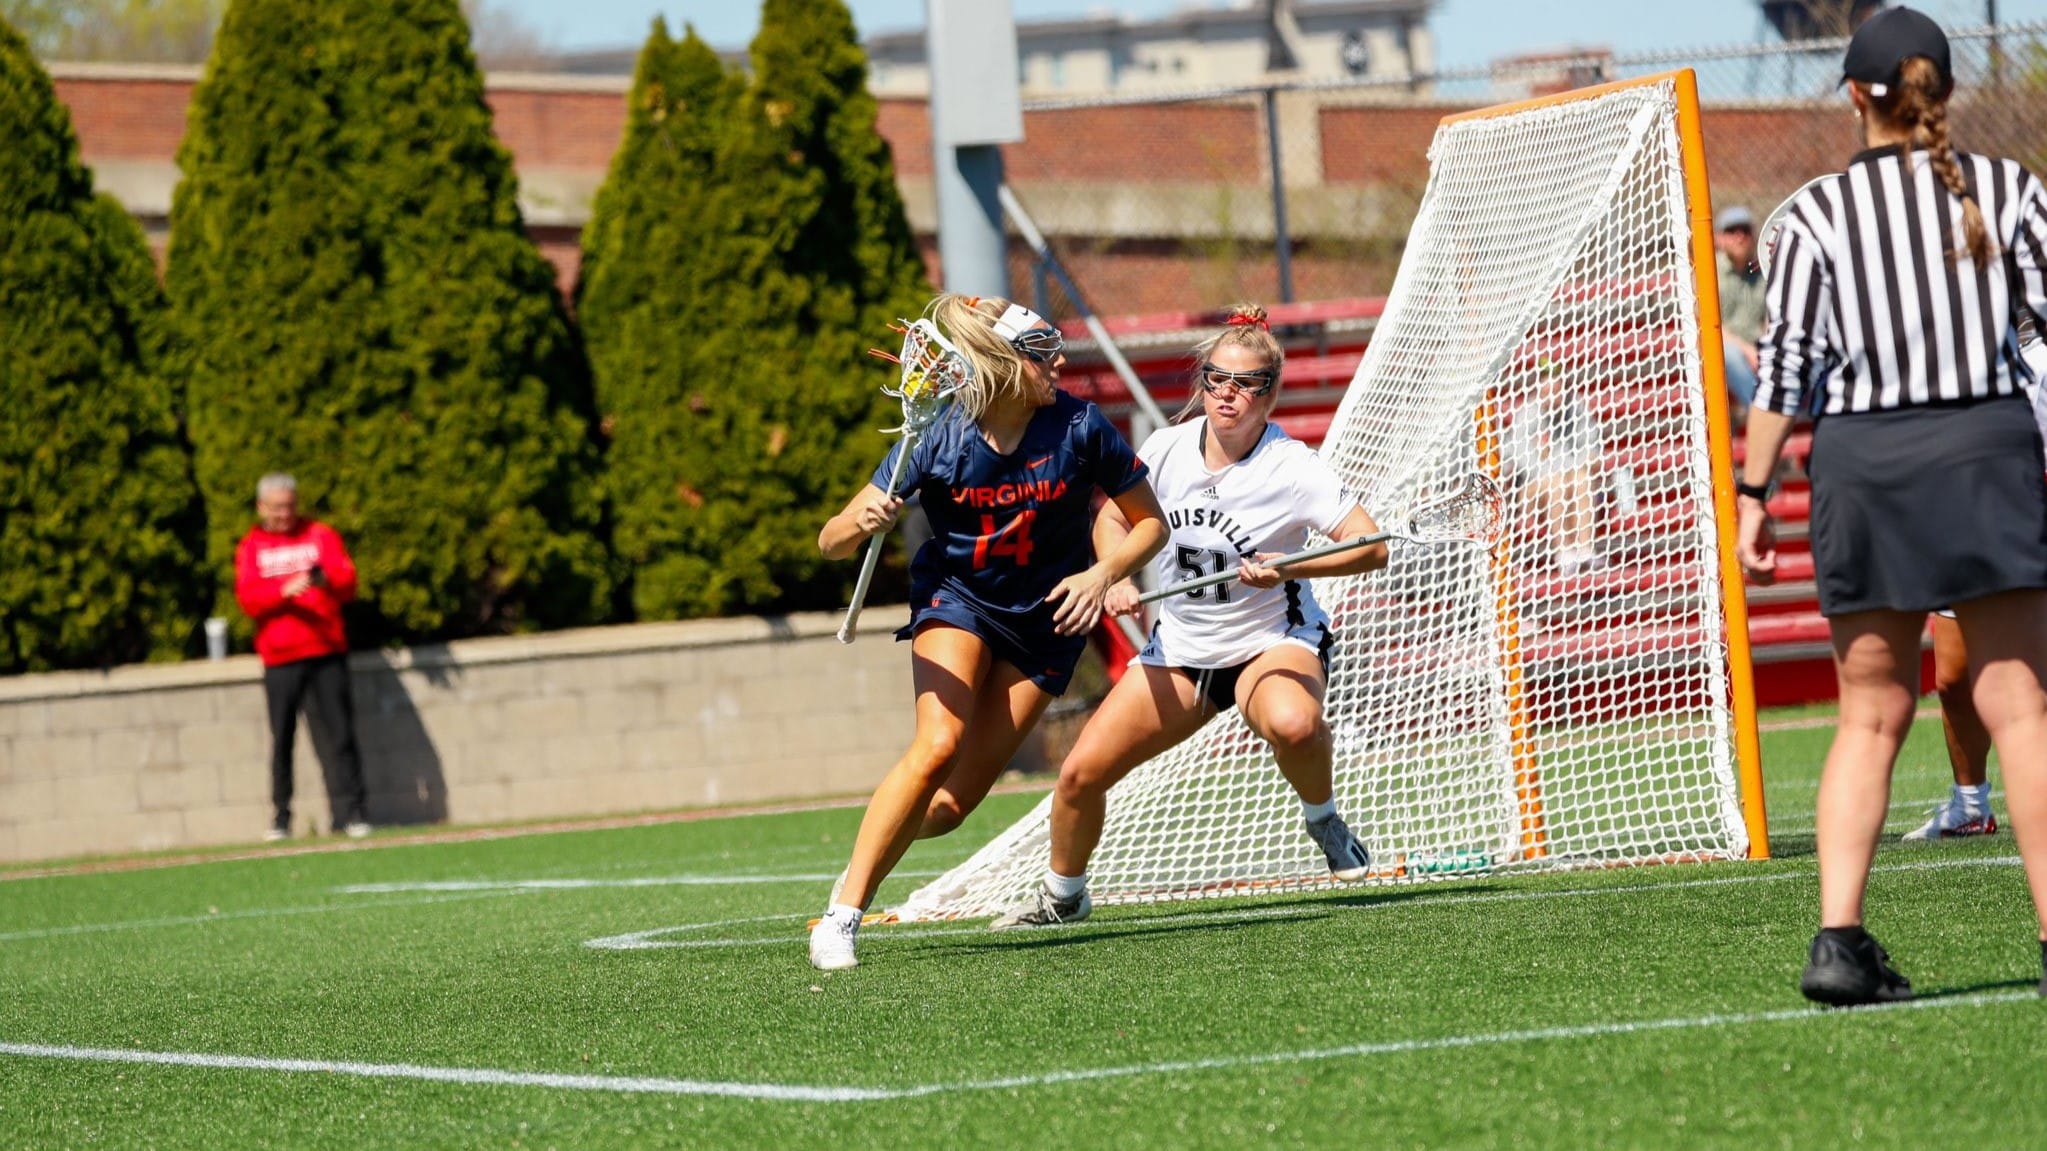 Morgan Schwab dodges with the ball during the Virginia women's lacrosse game against Louisville.